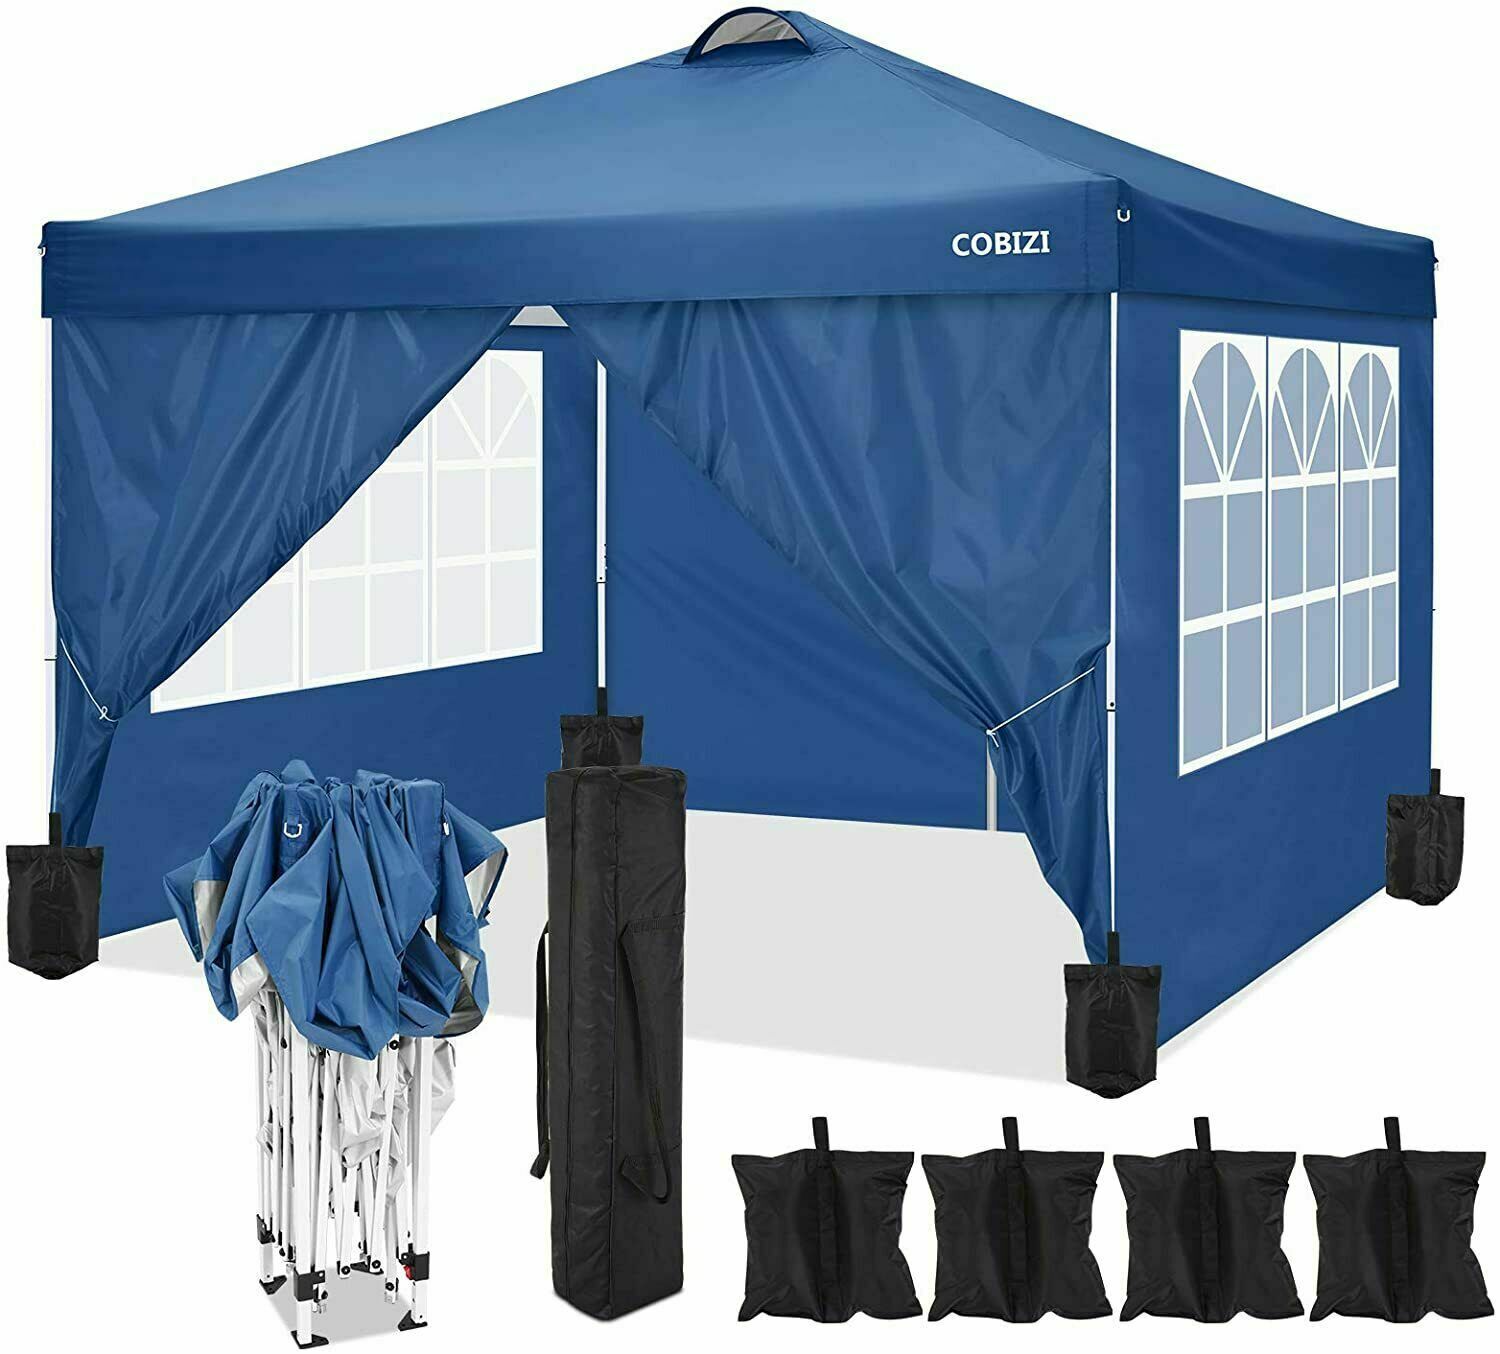 10'x10' Canopy Folding Gazebo Durable Oxford Cloth Party Tent With 4 Side Walls@